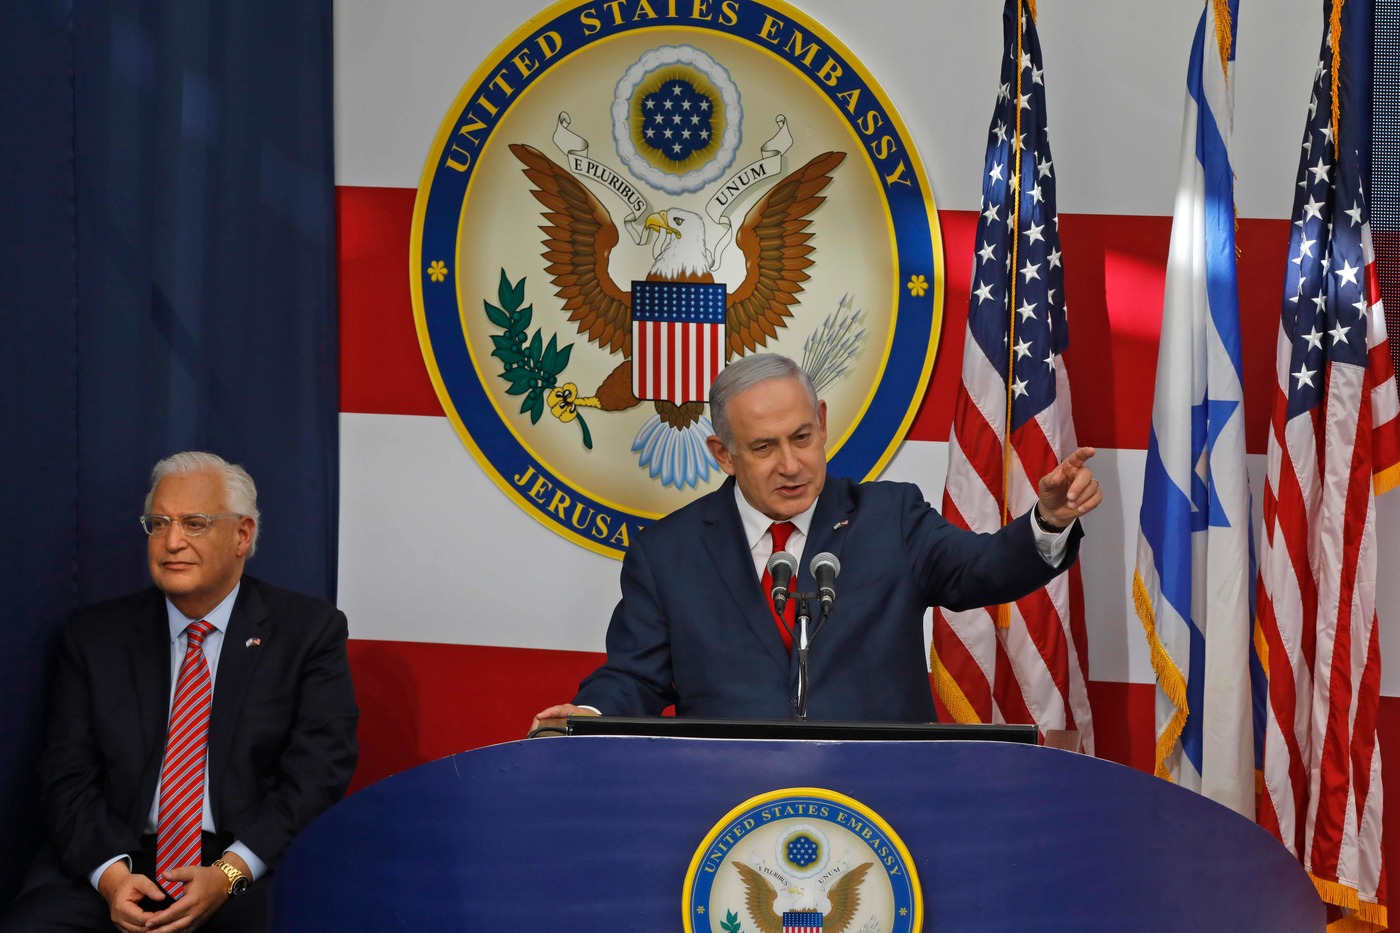 Israel's Prime Minister Benjamin Netanyahu delivers a speech during the opening of the US embassy in Jerusalem on May 14, 2018.
The United States moved its embassy in Israel to Jerusalem after months of global outcry, Palestinian anger and exuberant praise from Israelis over President Donald Trump's decision tossing aside decades of precedent. / AFP PHOTO / MENAHEM KAHANA